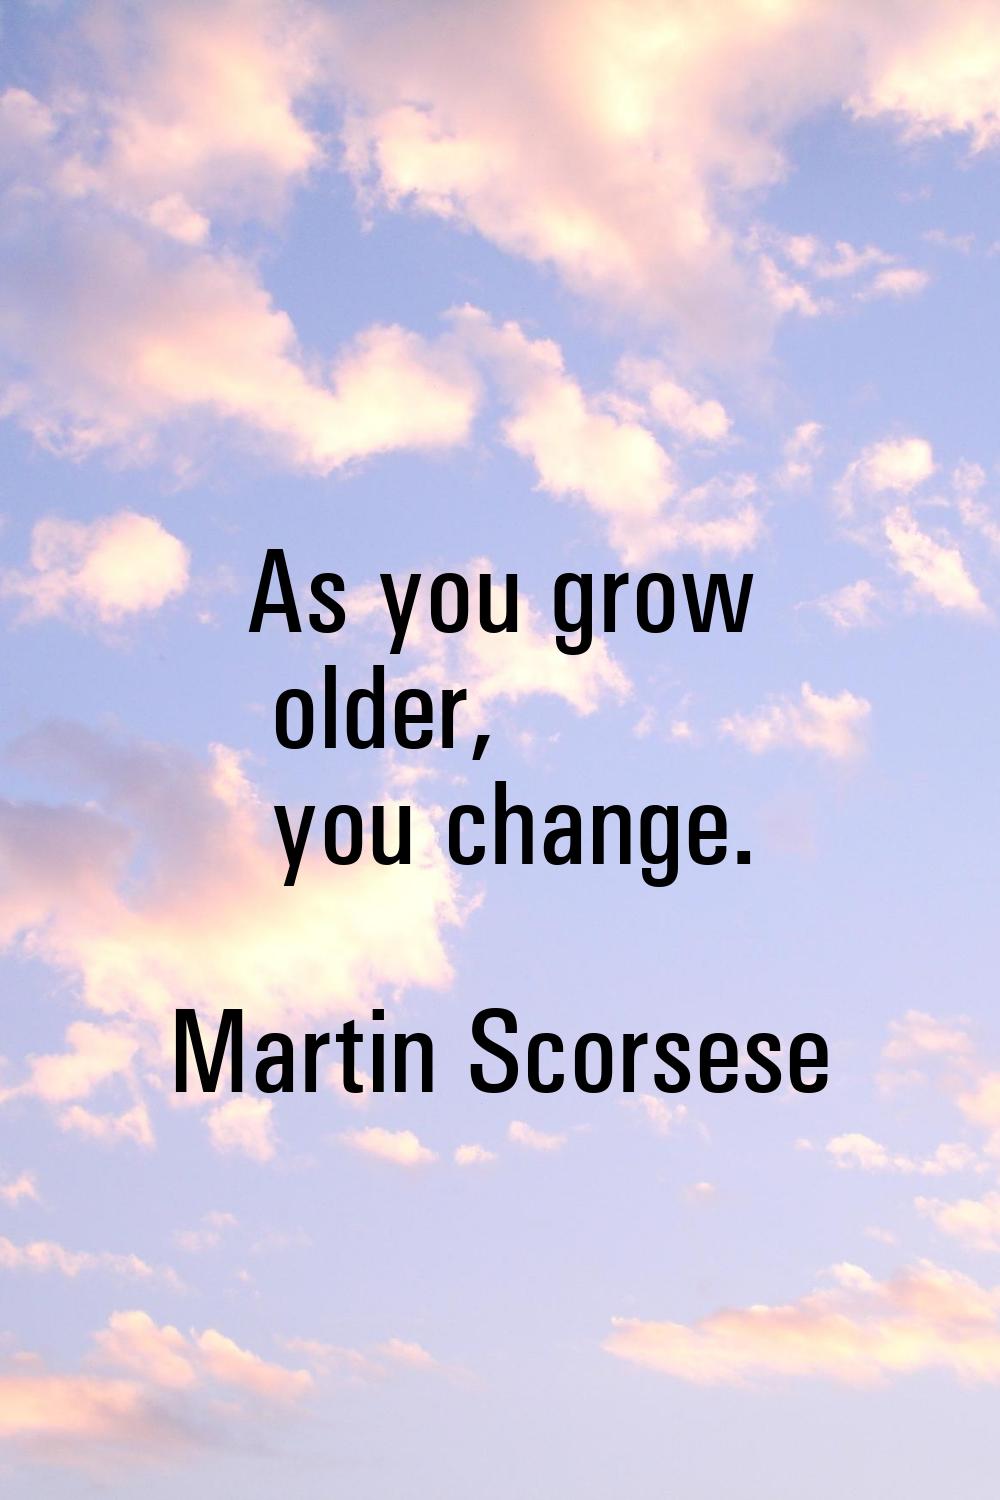 As you grow older, you change.